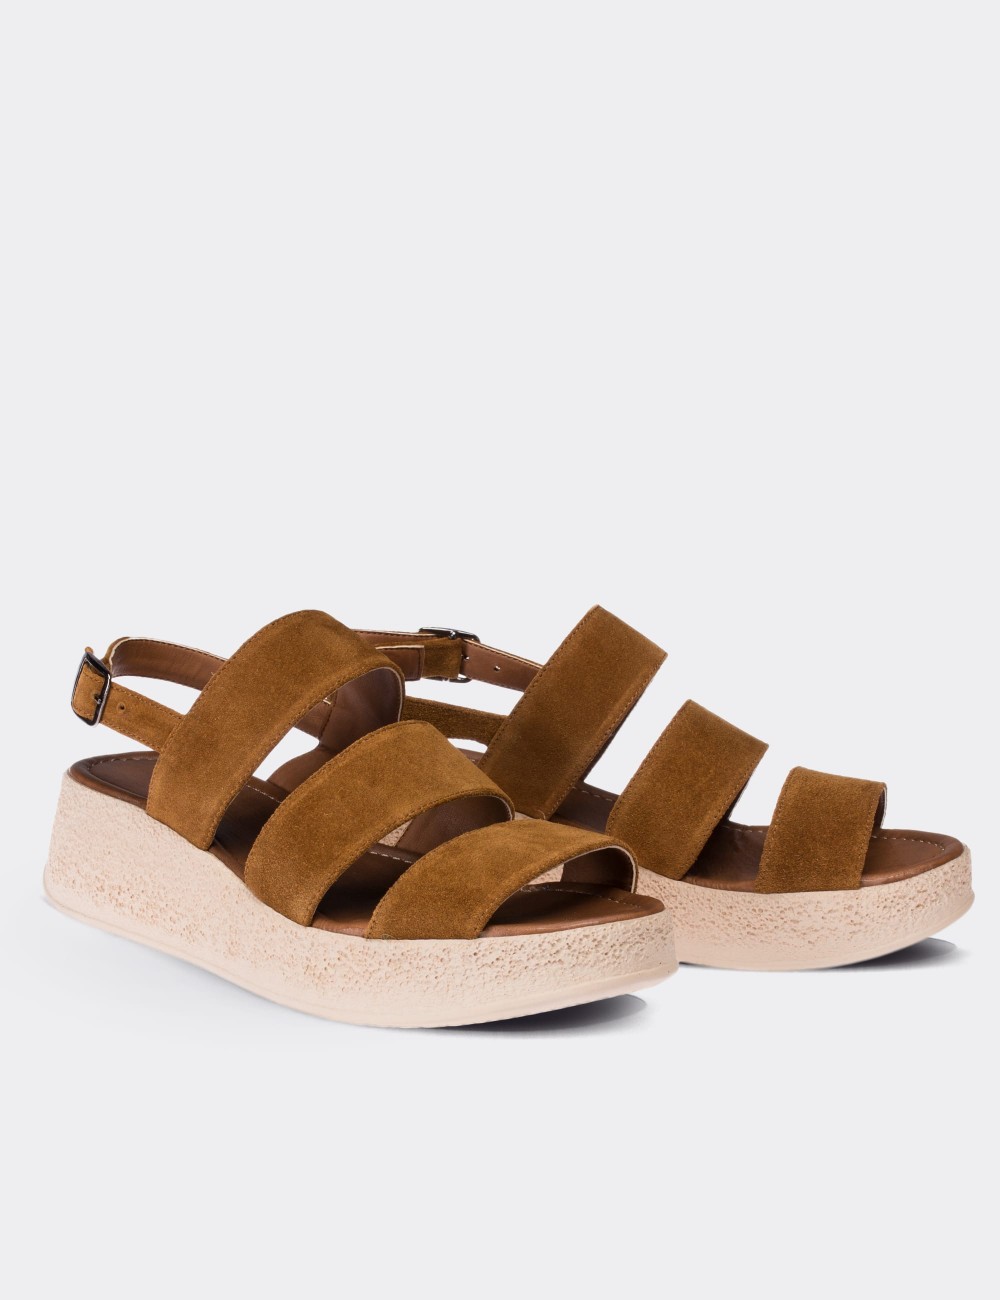 Tan Suede Leather  Sandals - 02123ZTBAP01